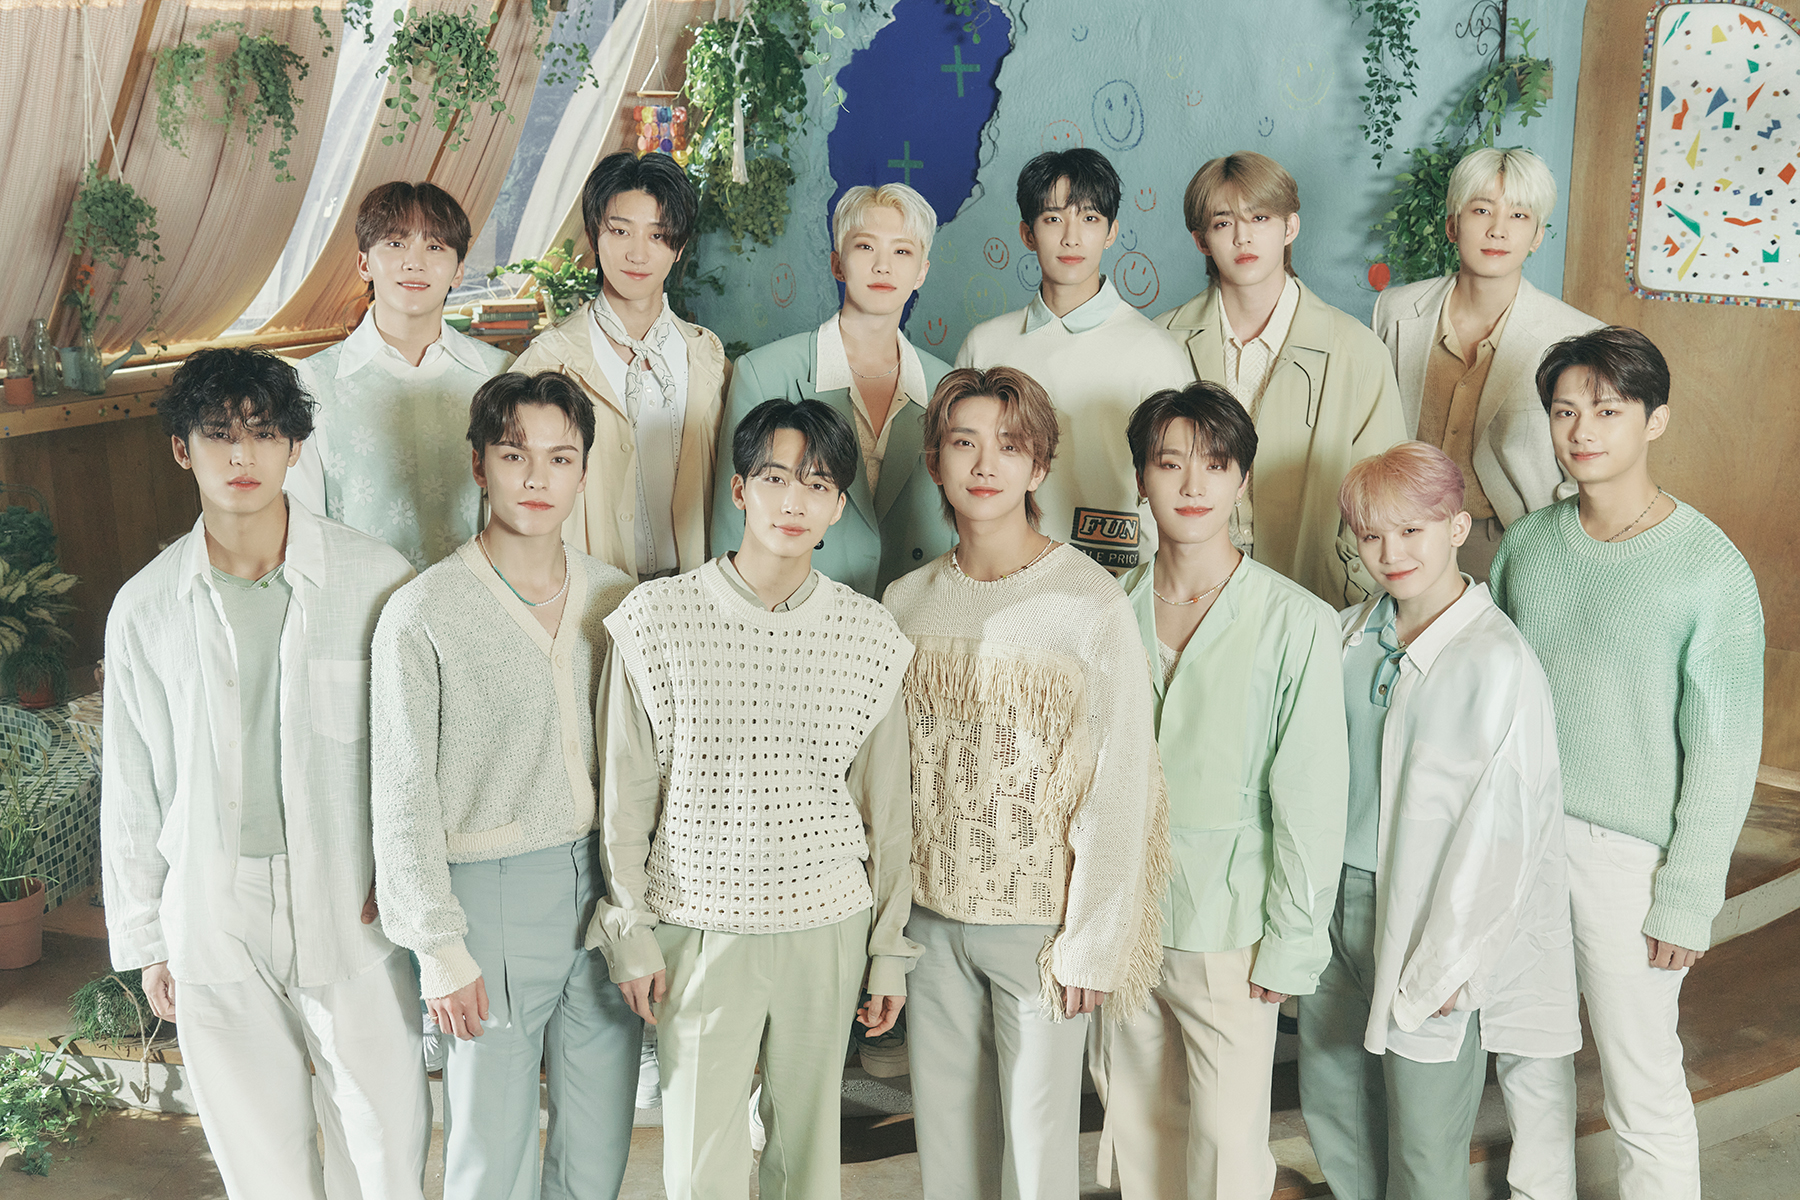 Hot and Passionate': K-Pop Superstars Seventeen Open Up About Their New Album – Rolling Stone